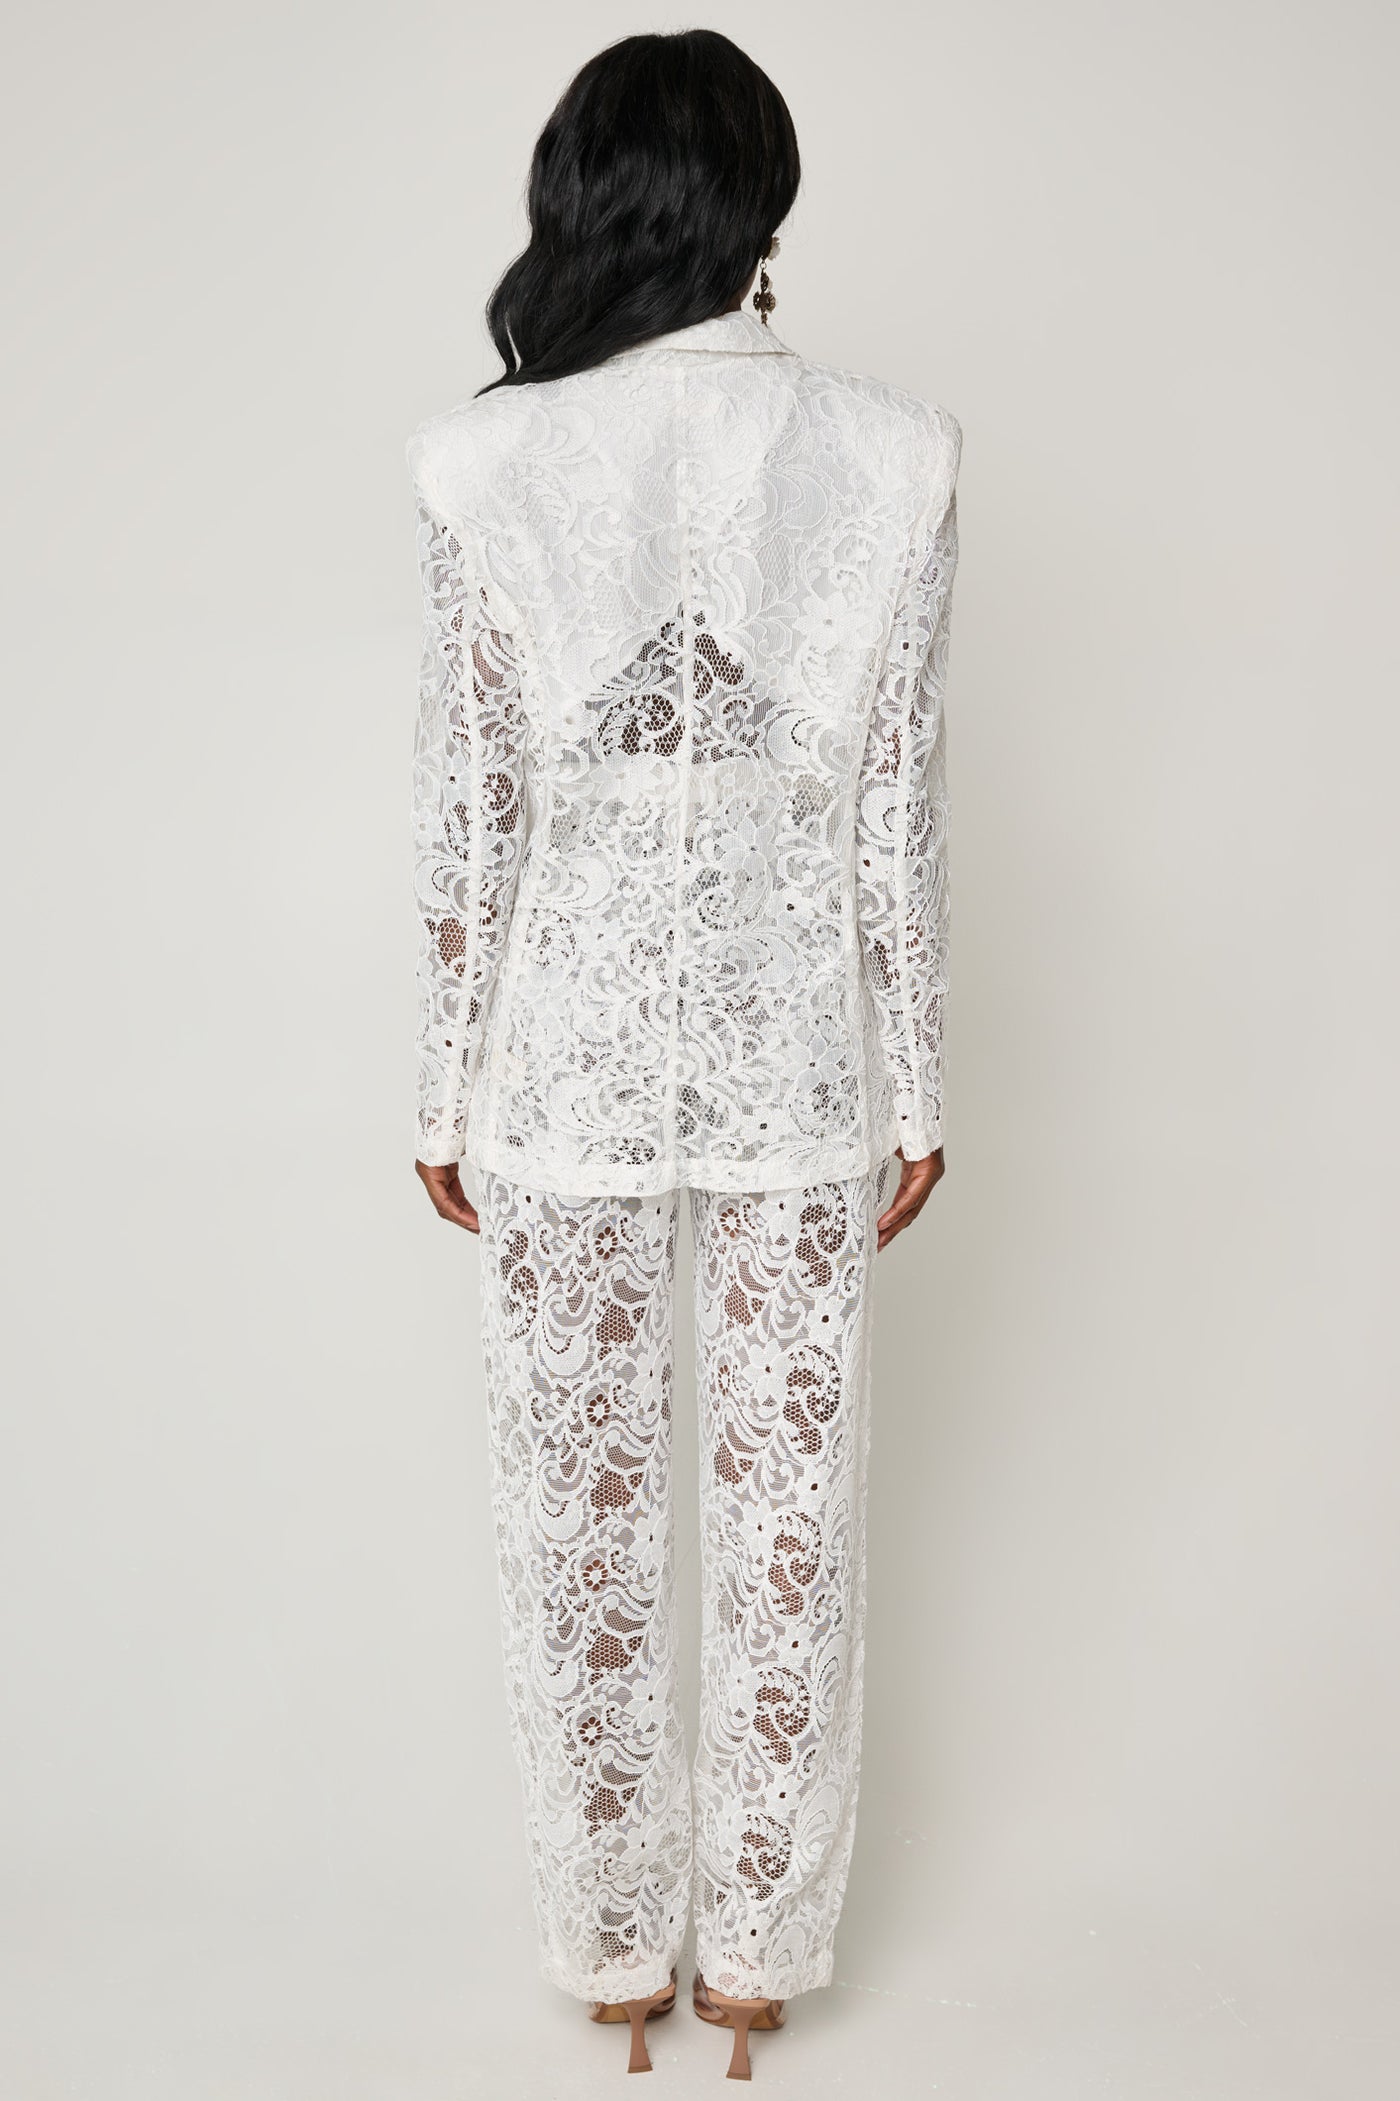 Baronette White Lace Suit by Ronny Kobo - RENTAL